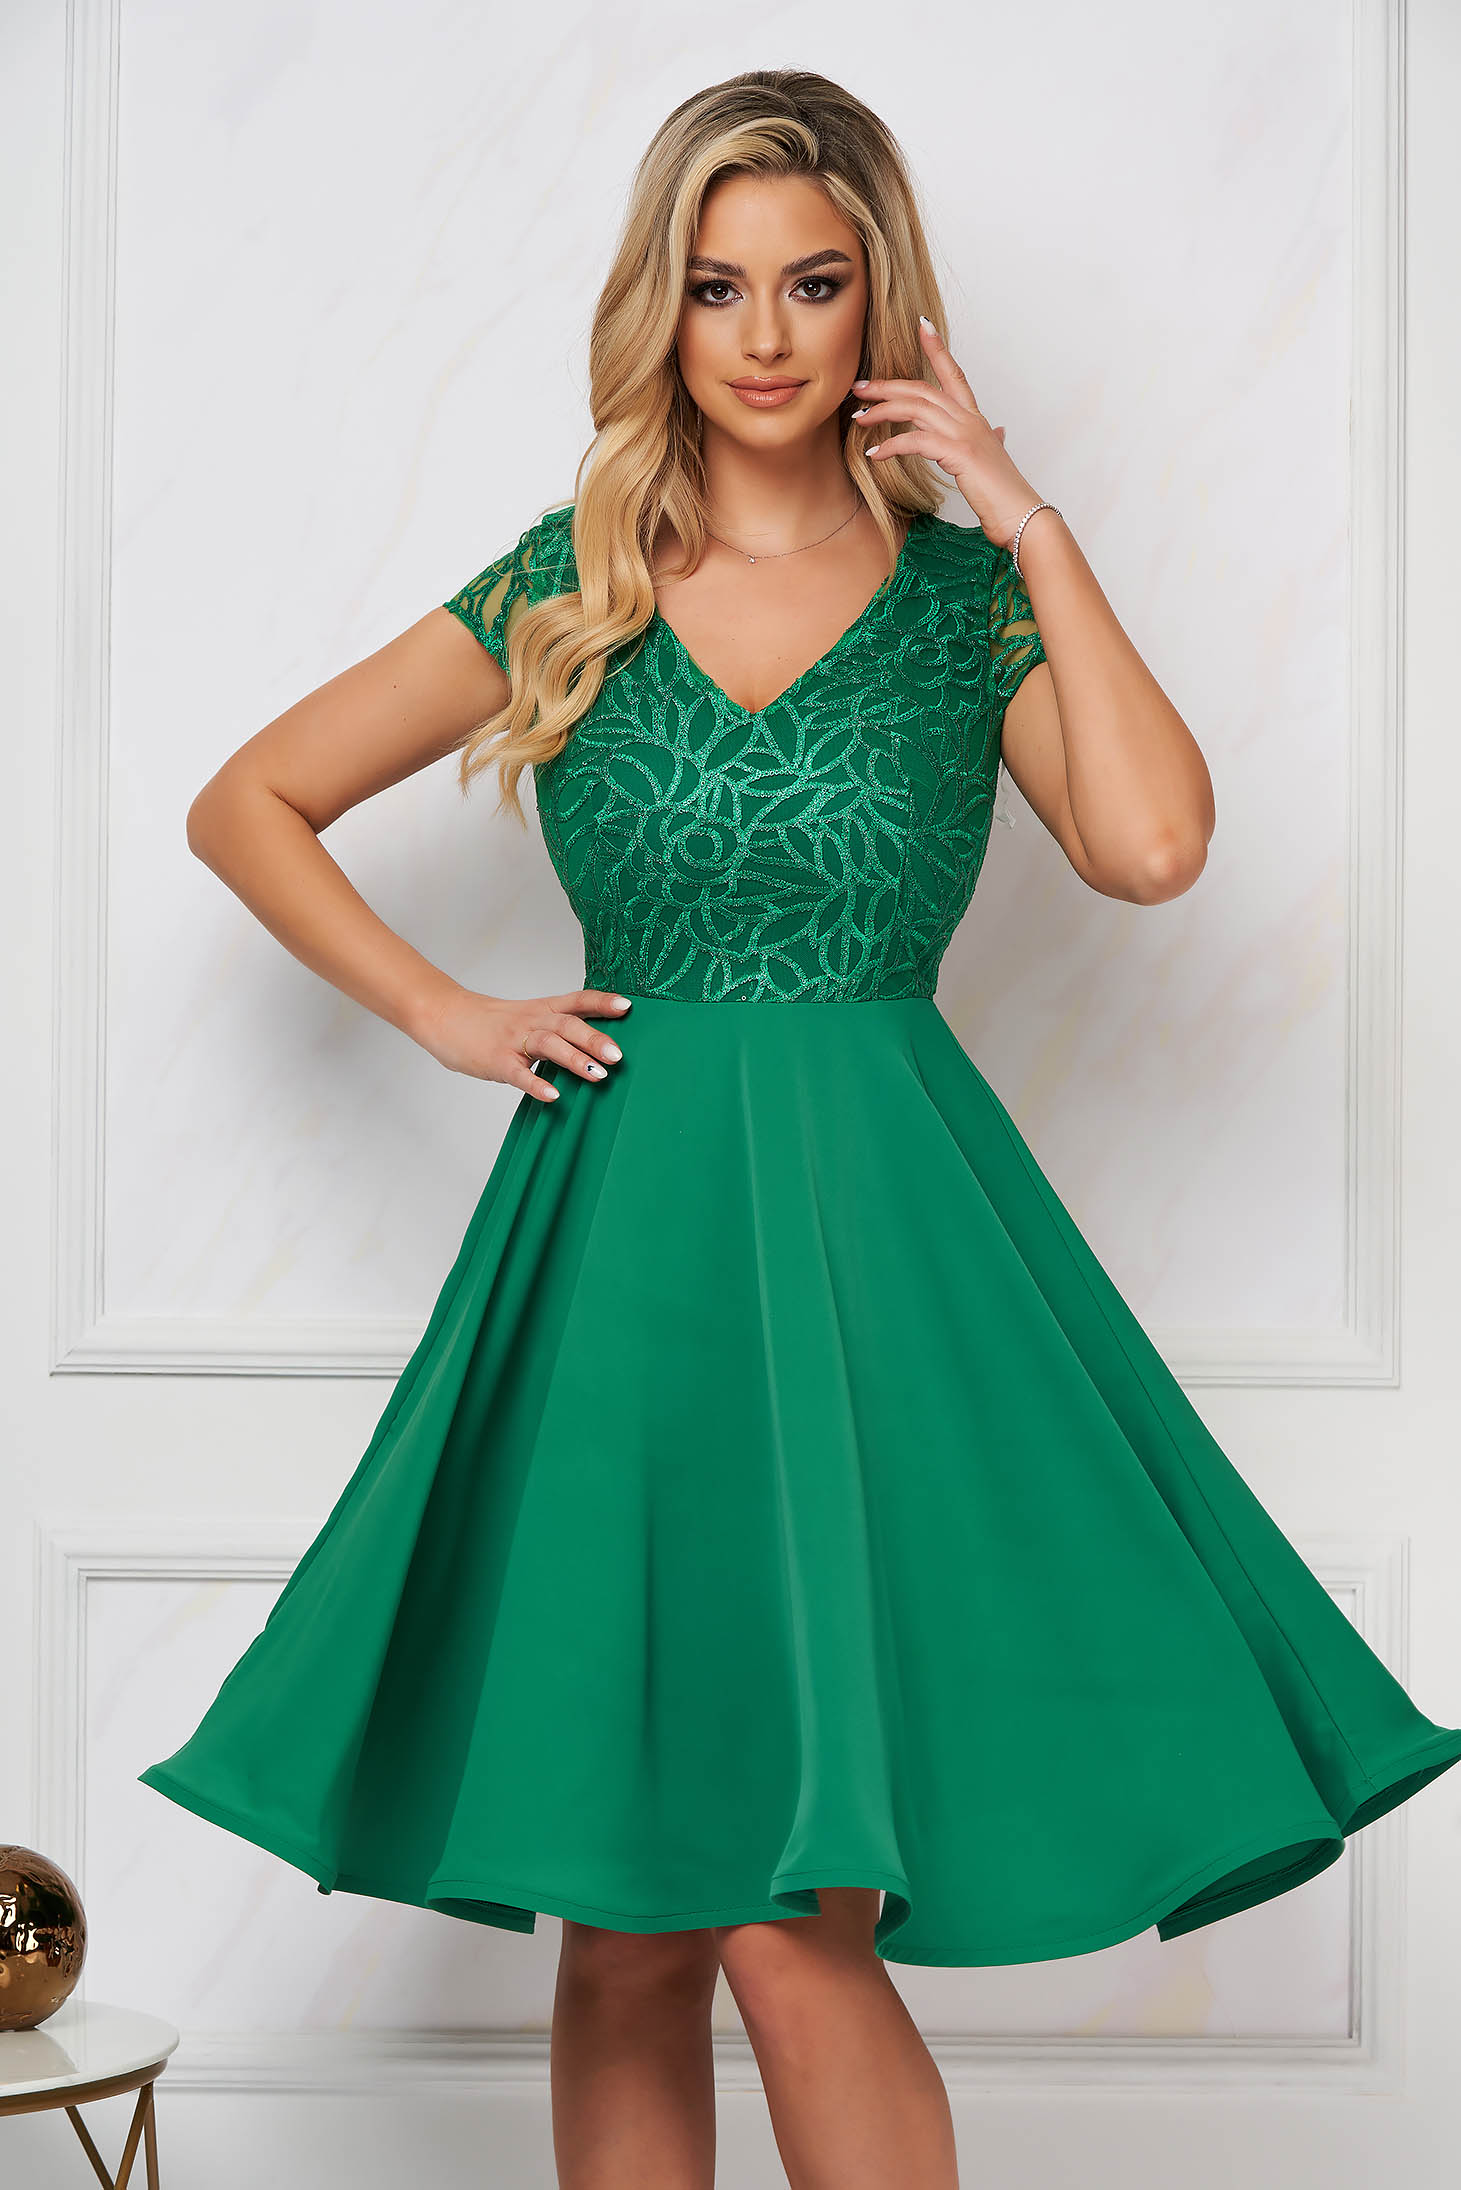 Occasional StarShinerS green cloche dress from satin fabric texture with sequin embellished details